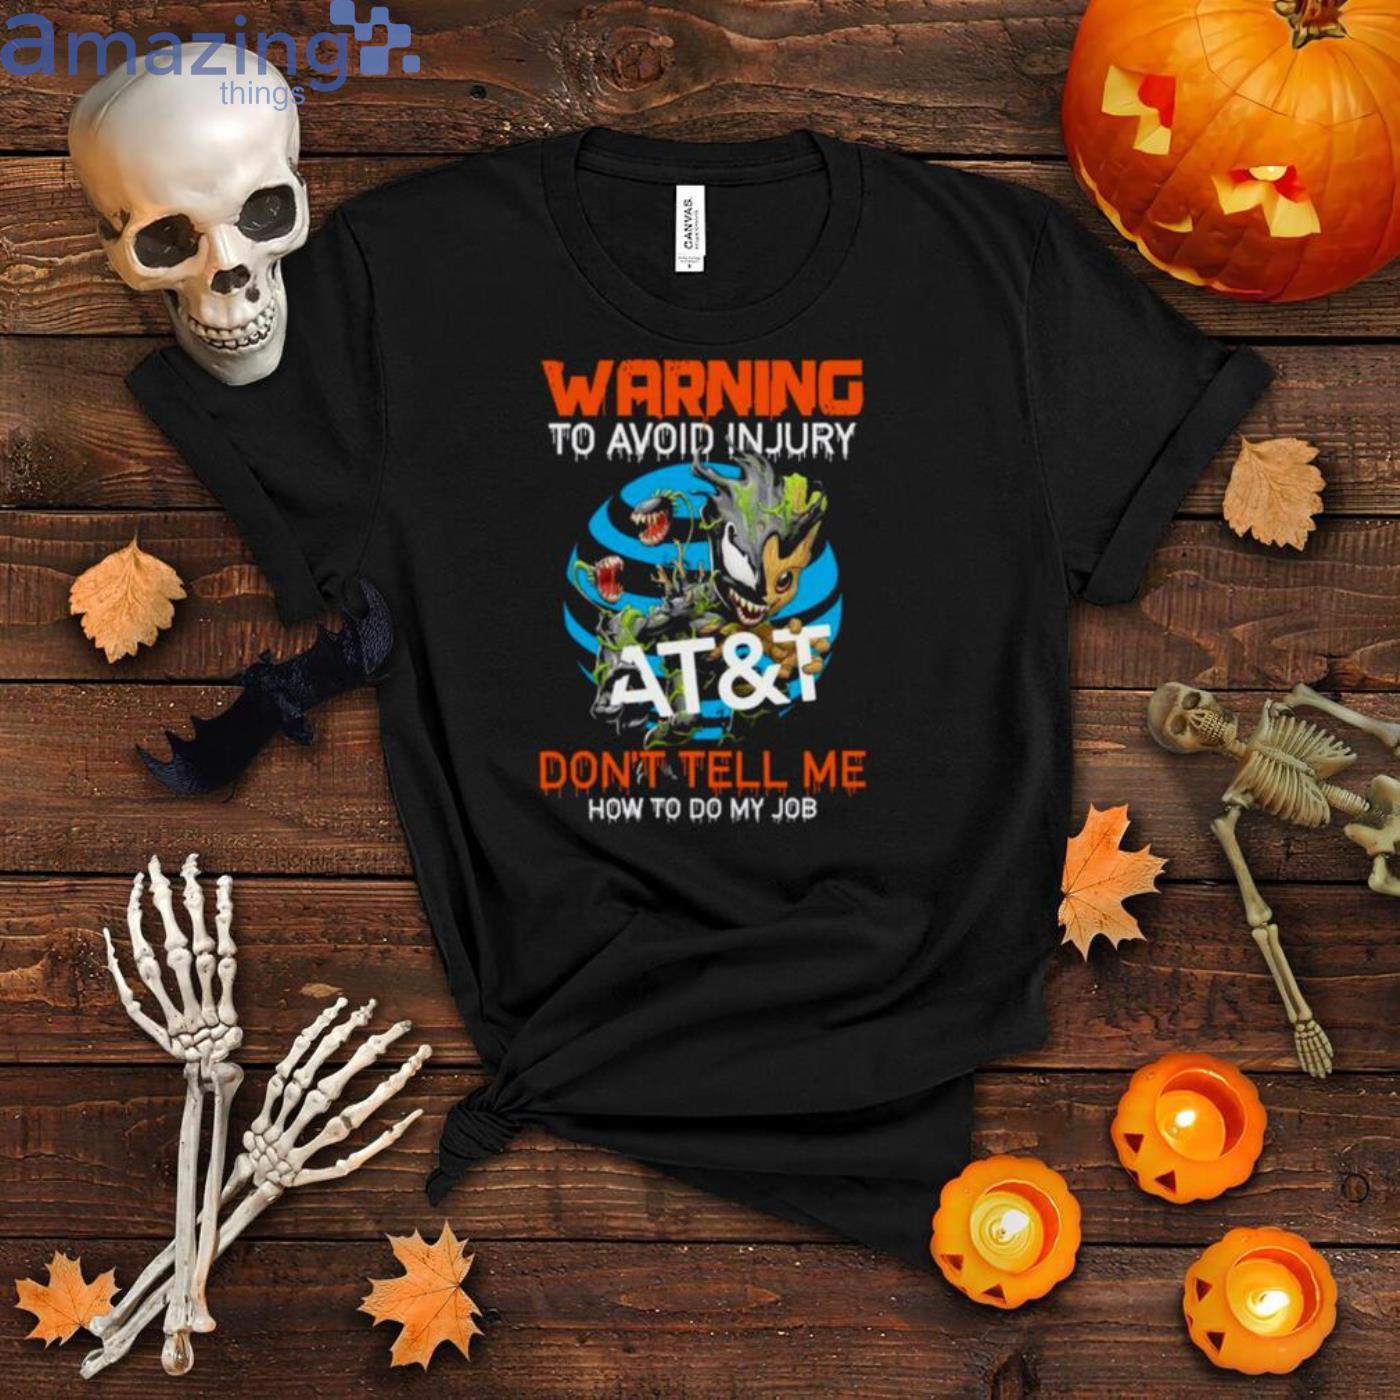 Baby Groot And Venom Warning To Avoid Injury At&t Dont Tell Me How To Do My Job Shirt Product Photo 1